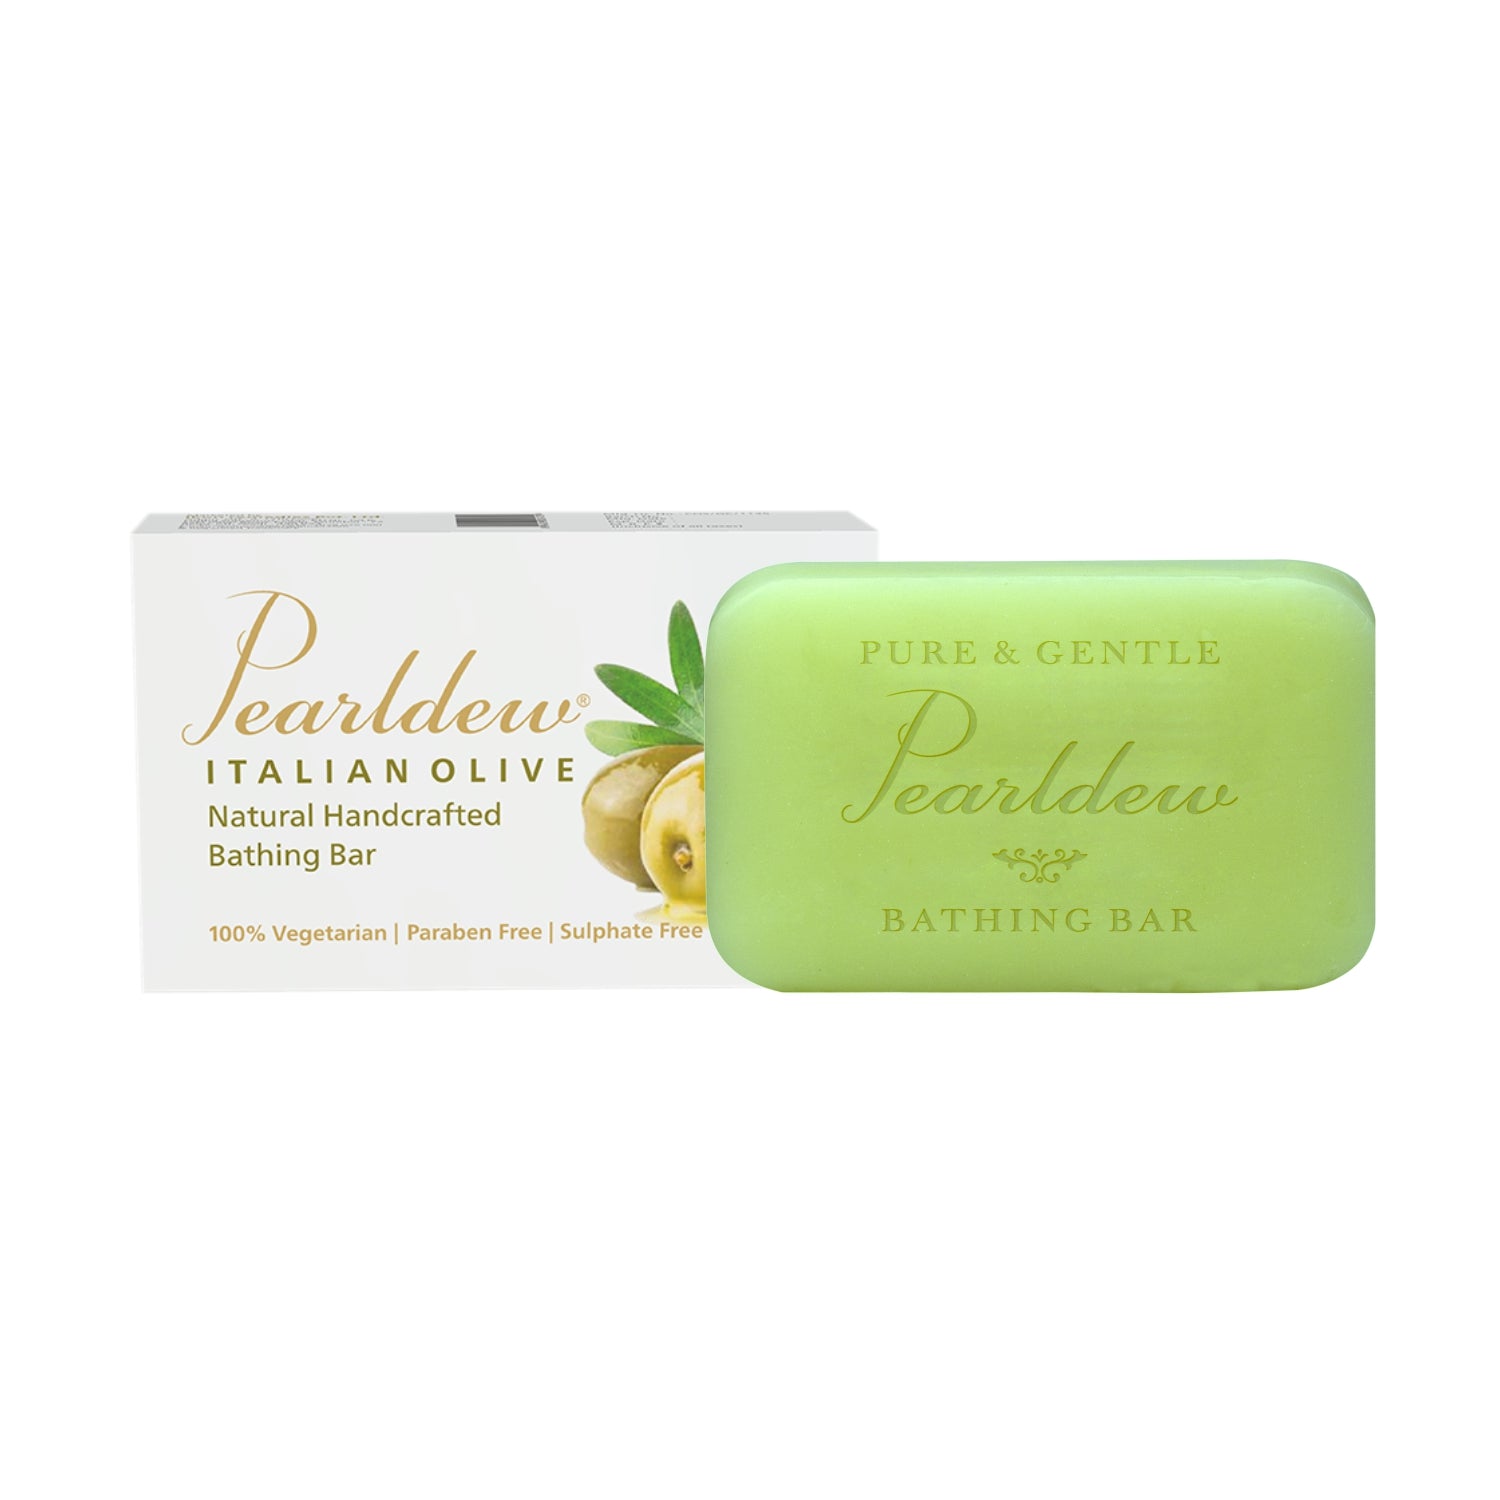 Pearldew Italian Olive Natural Handcrafted Bathing Bar (75 gm)